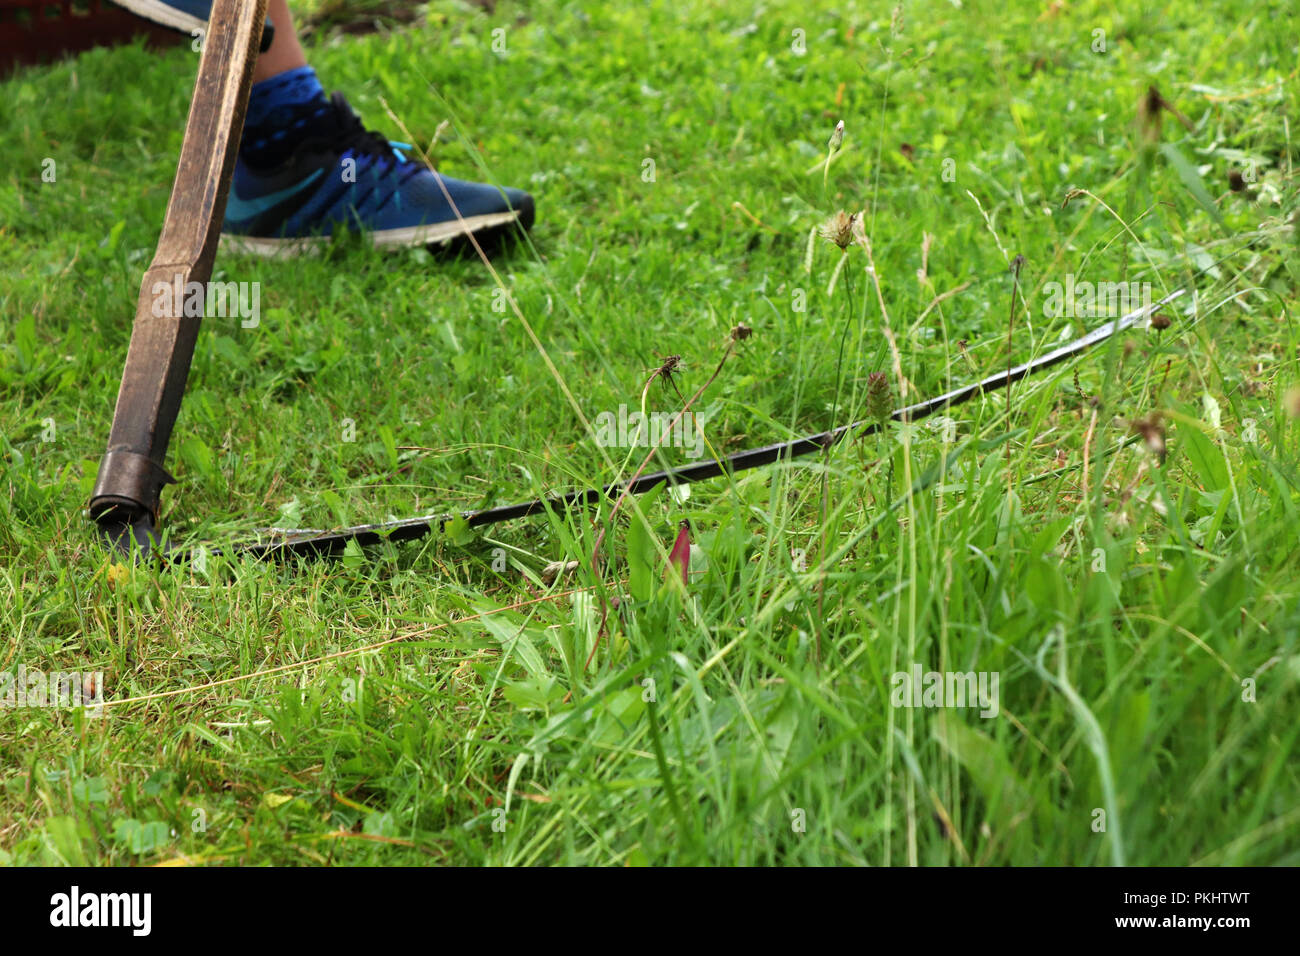 A man mowing a grass with old useful tool known as scythe.  In the village Stock Photo